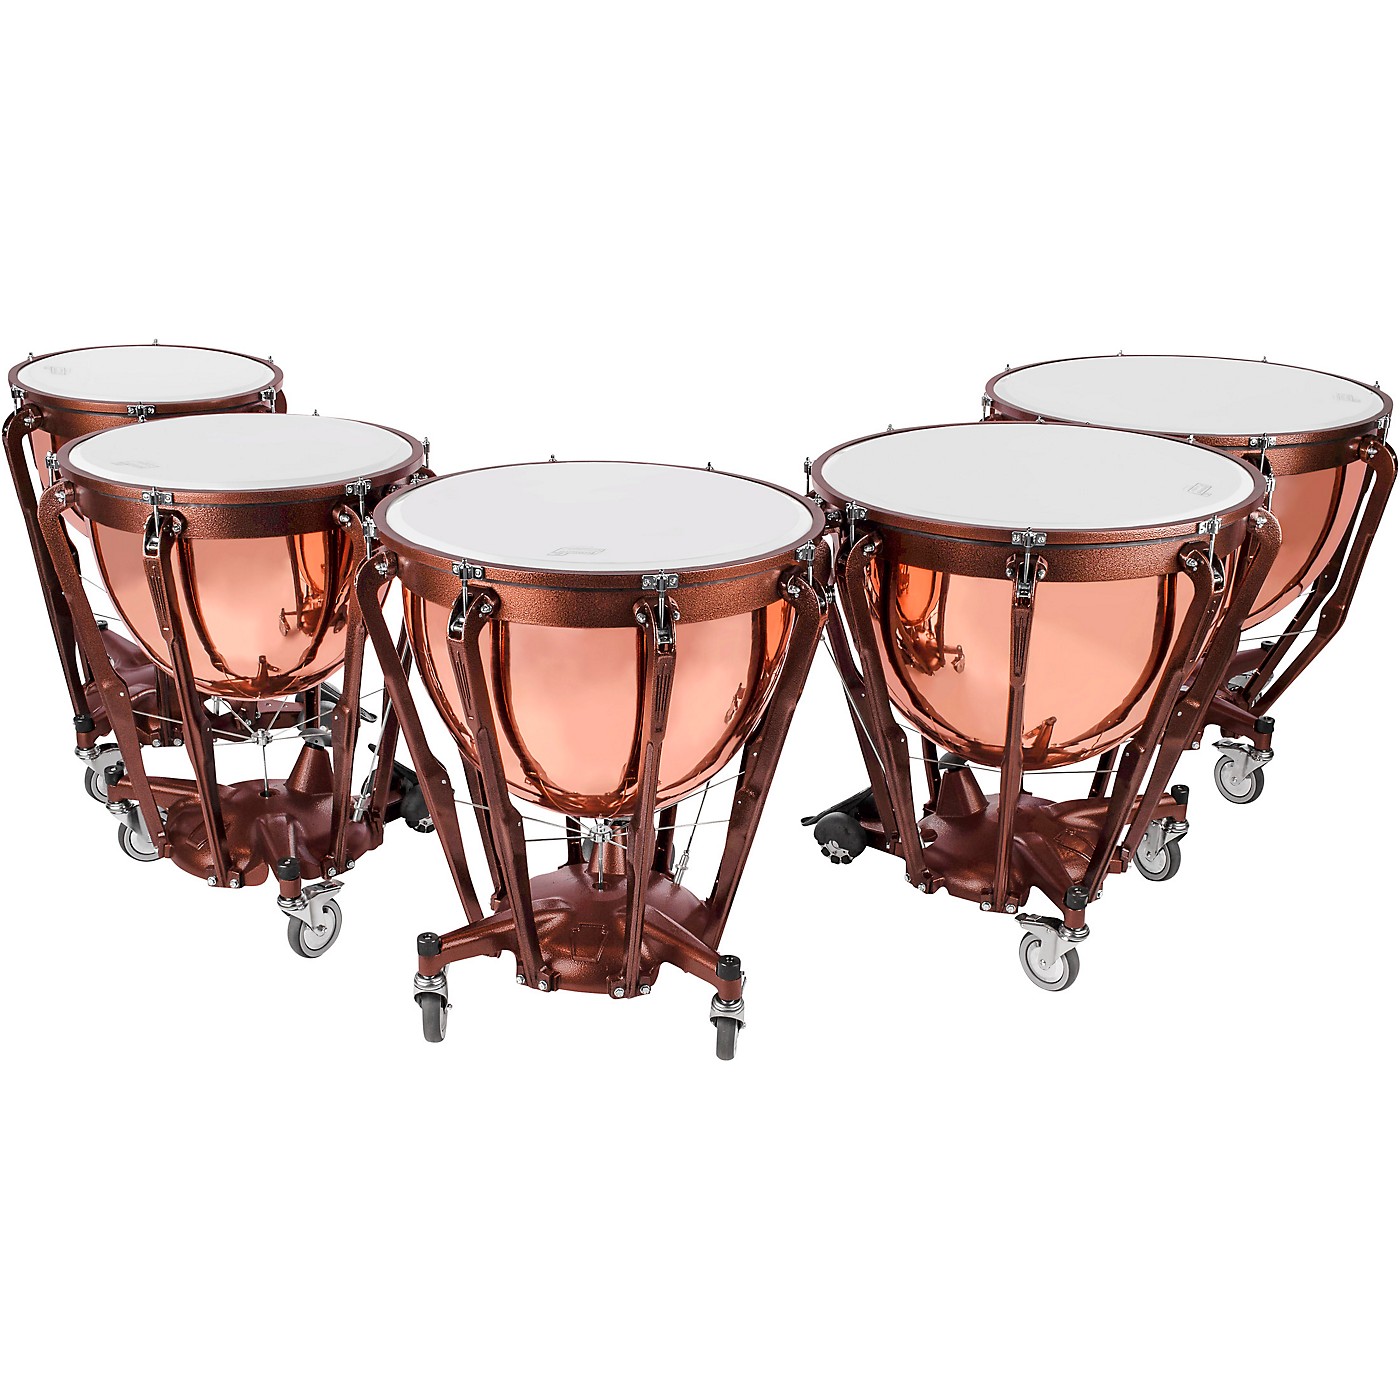 Ludwig Professional Series Polished Copper Timpani Set with Gauge thumbnail